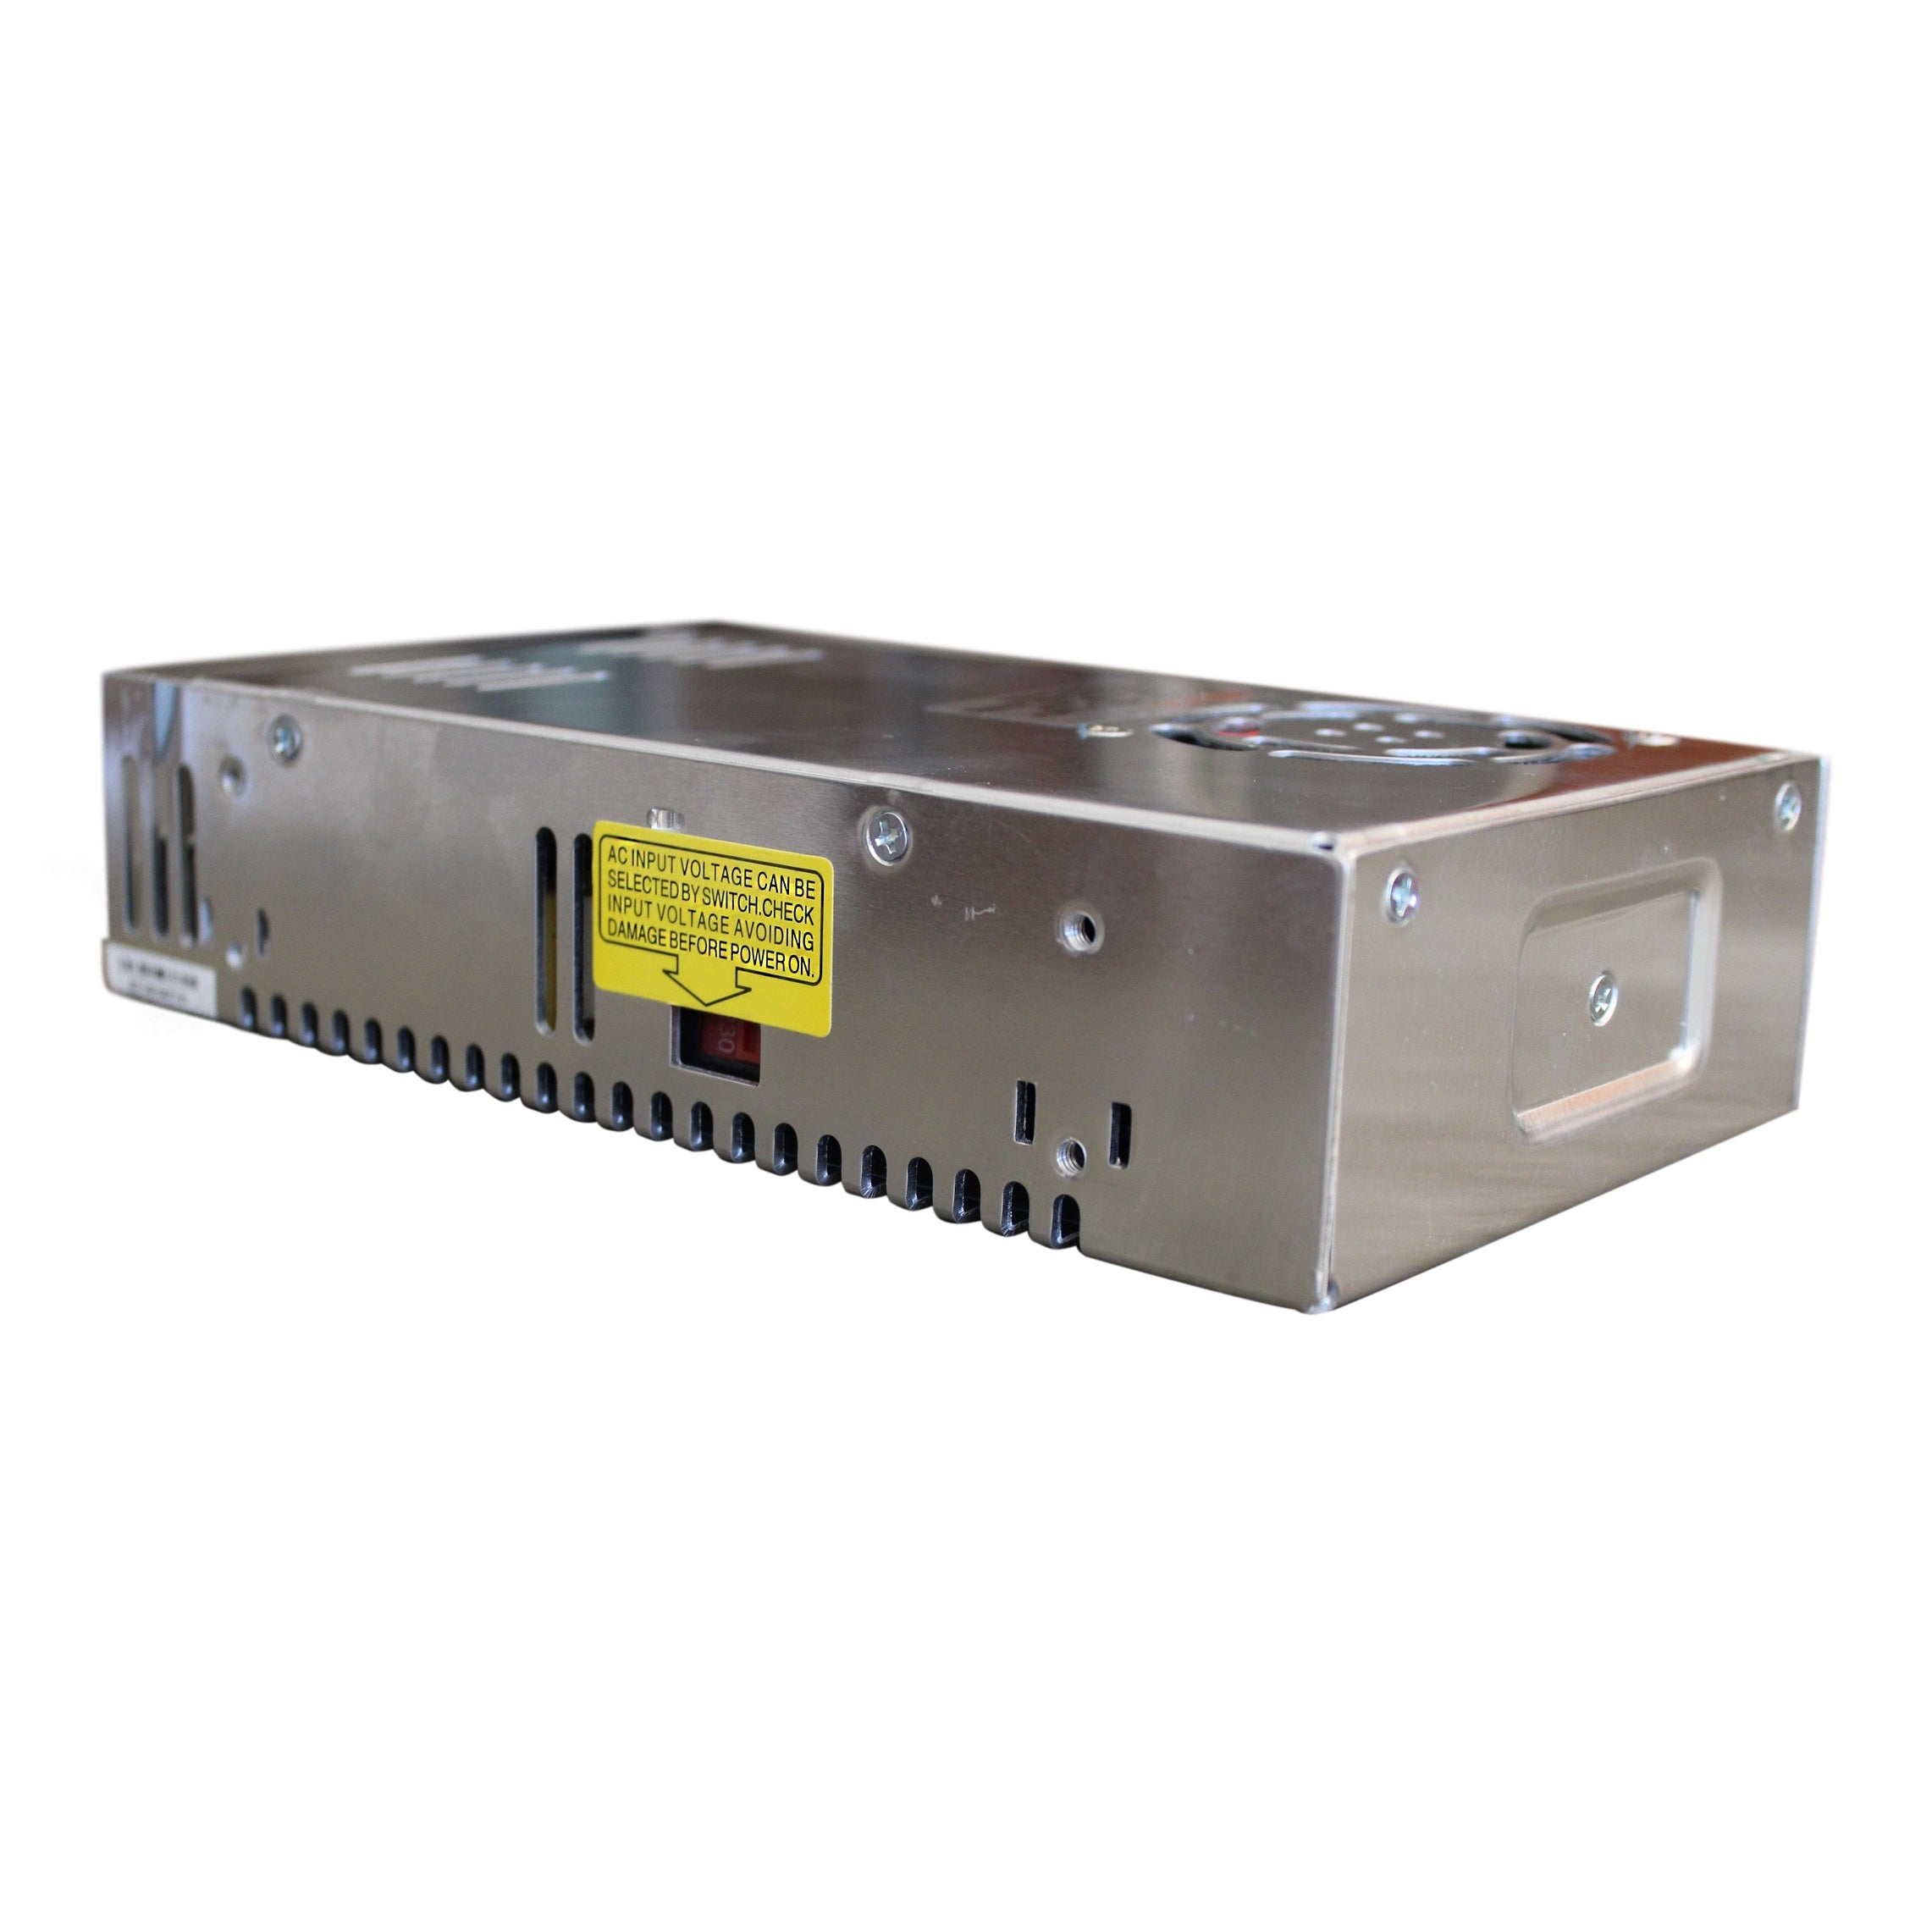 AC to DC Power Supply 12v 30A Product Image